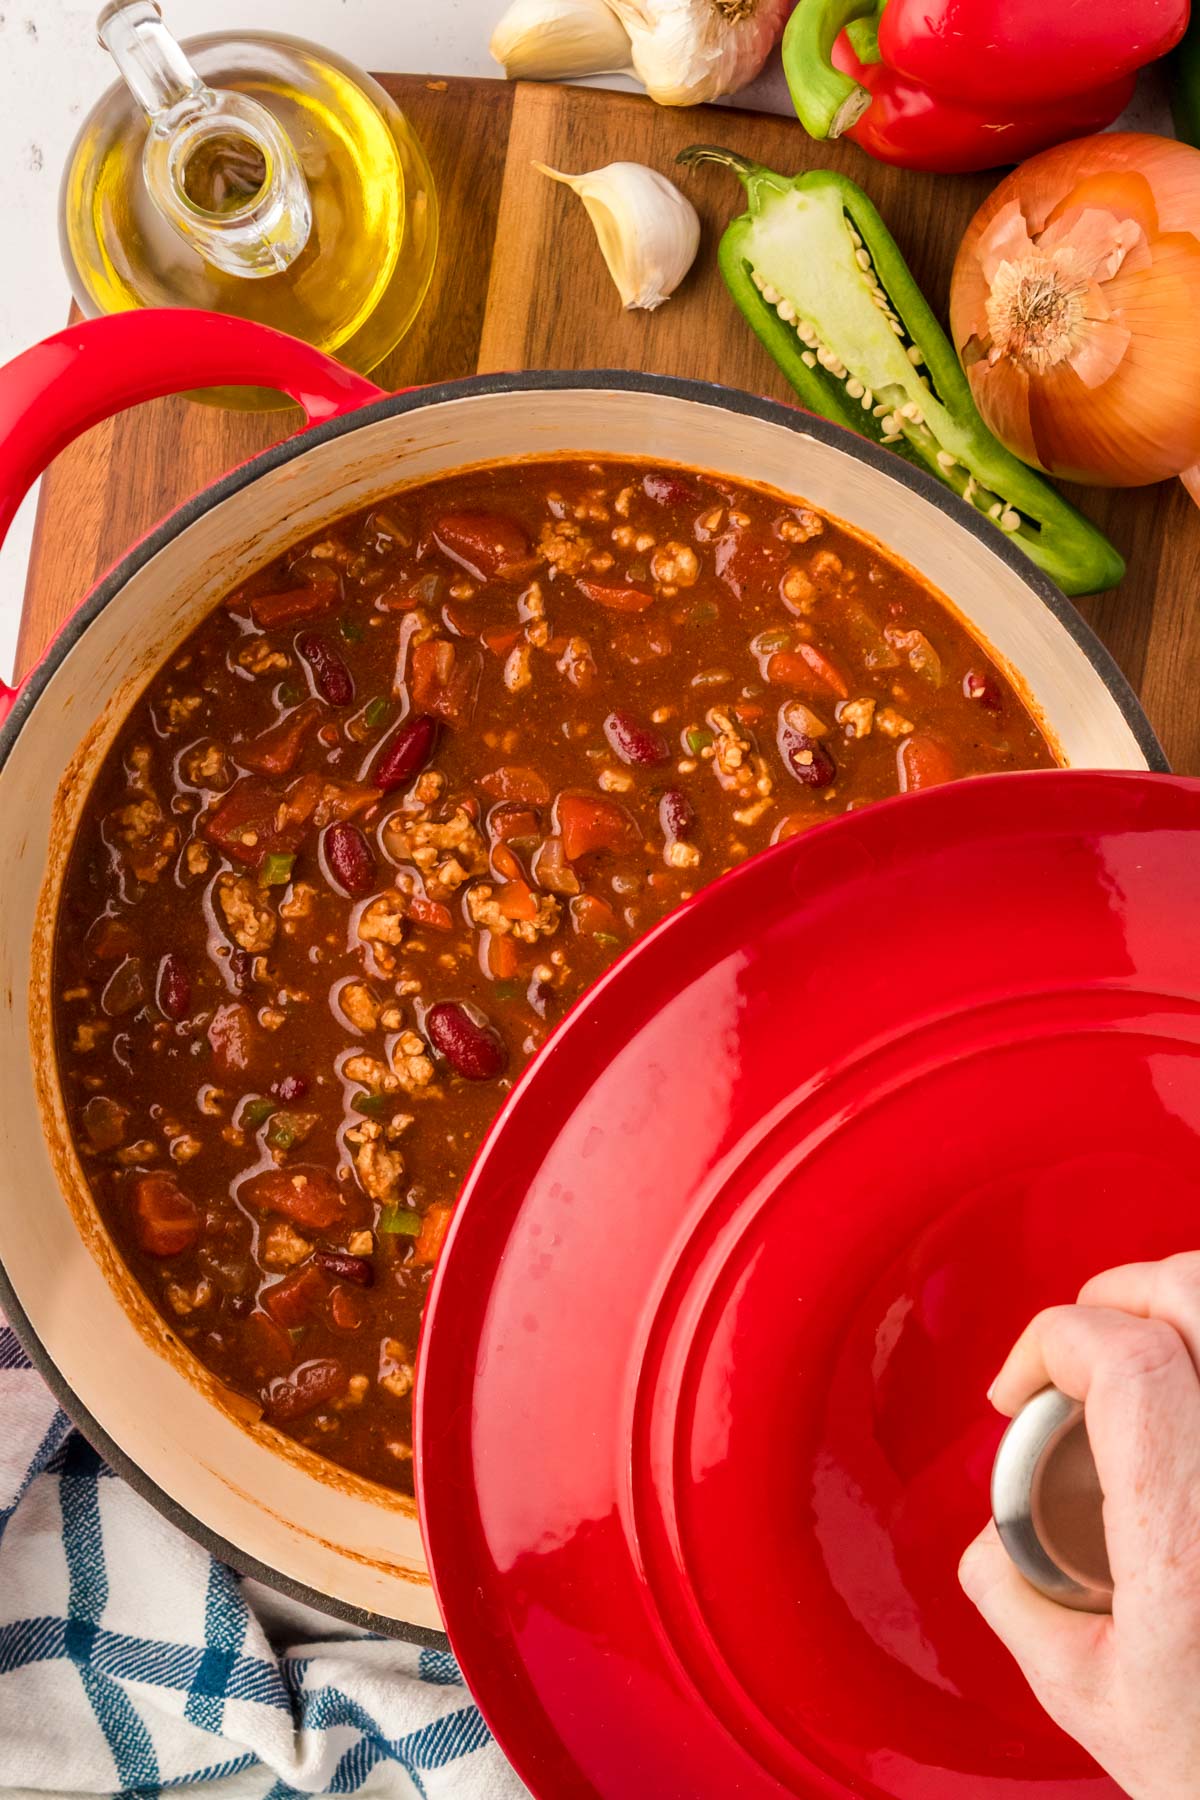 A woman's hand removing the lid of a red Dutch oven to reveal turkey chili inside.